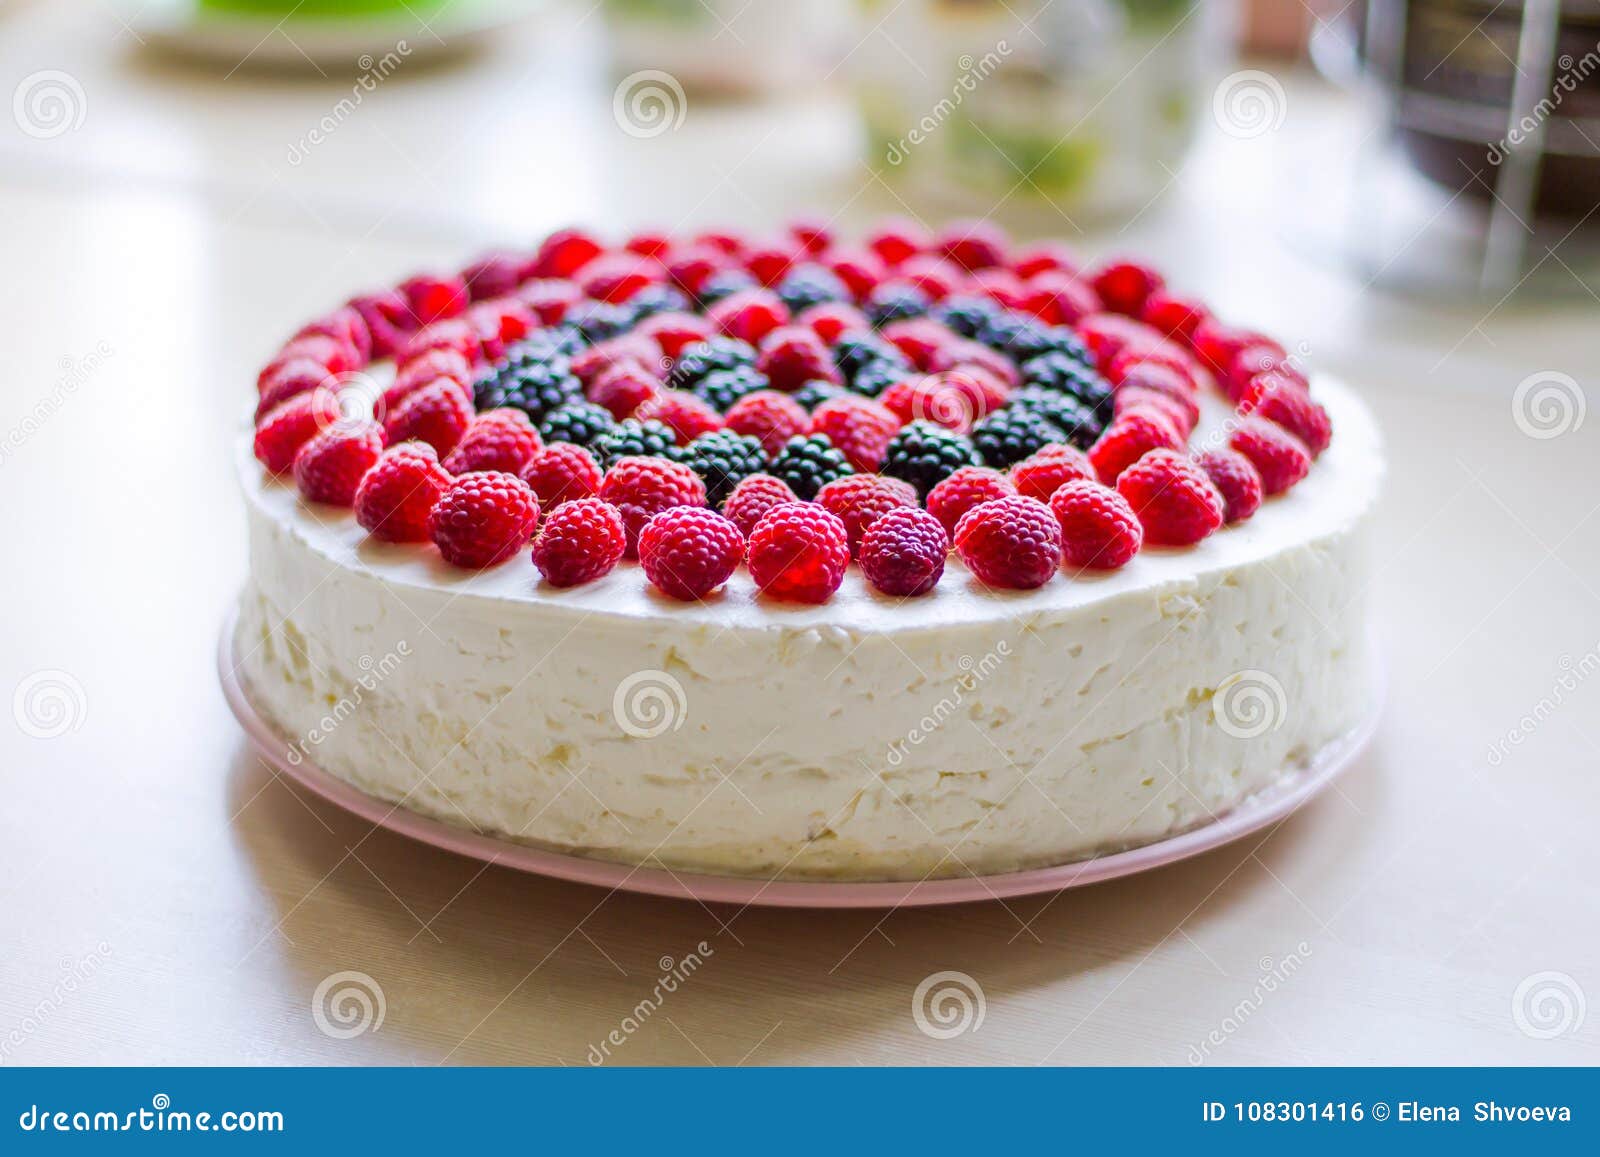 Home Mousse Cake With Cottage Cheese And Jello With Raspberries